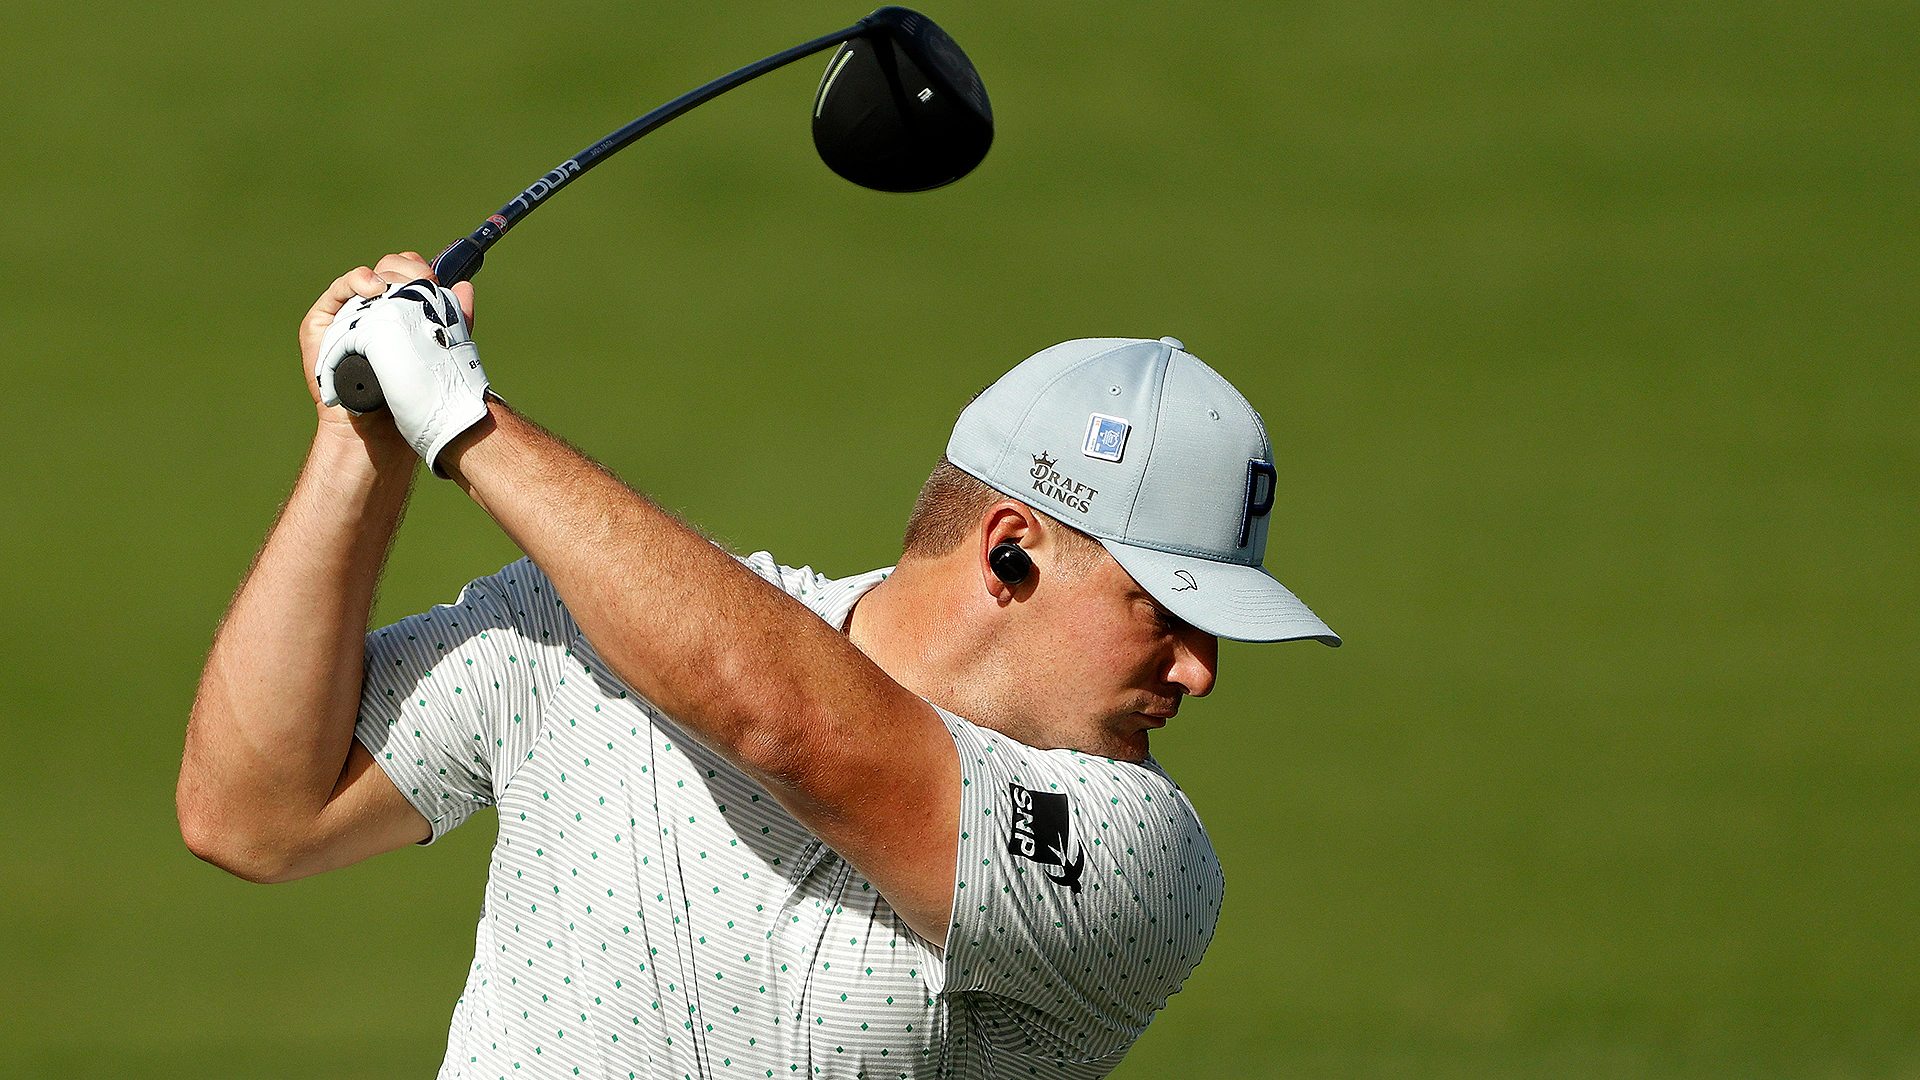 Bryson DeChambeau not yet ruling out 48-inch driver: ‘Really promising right now’